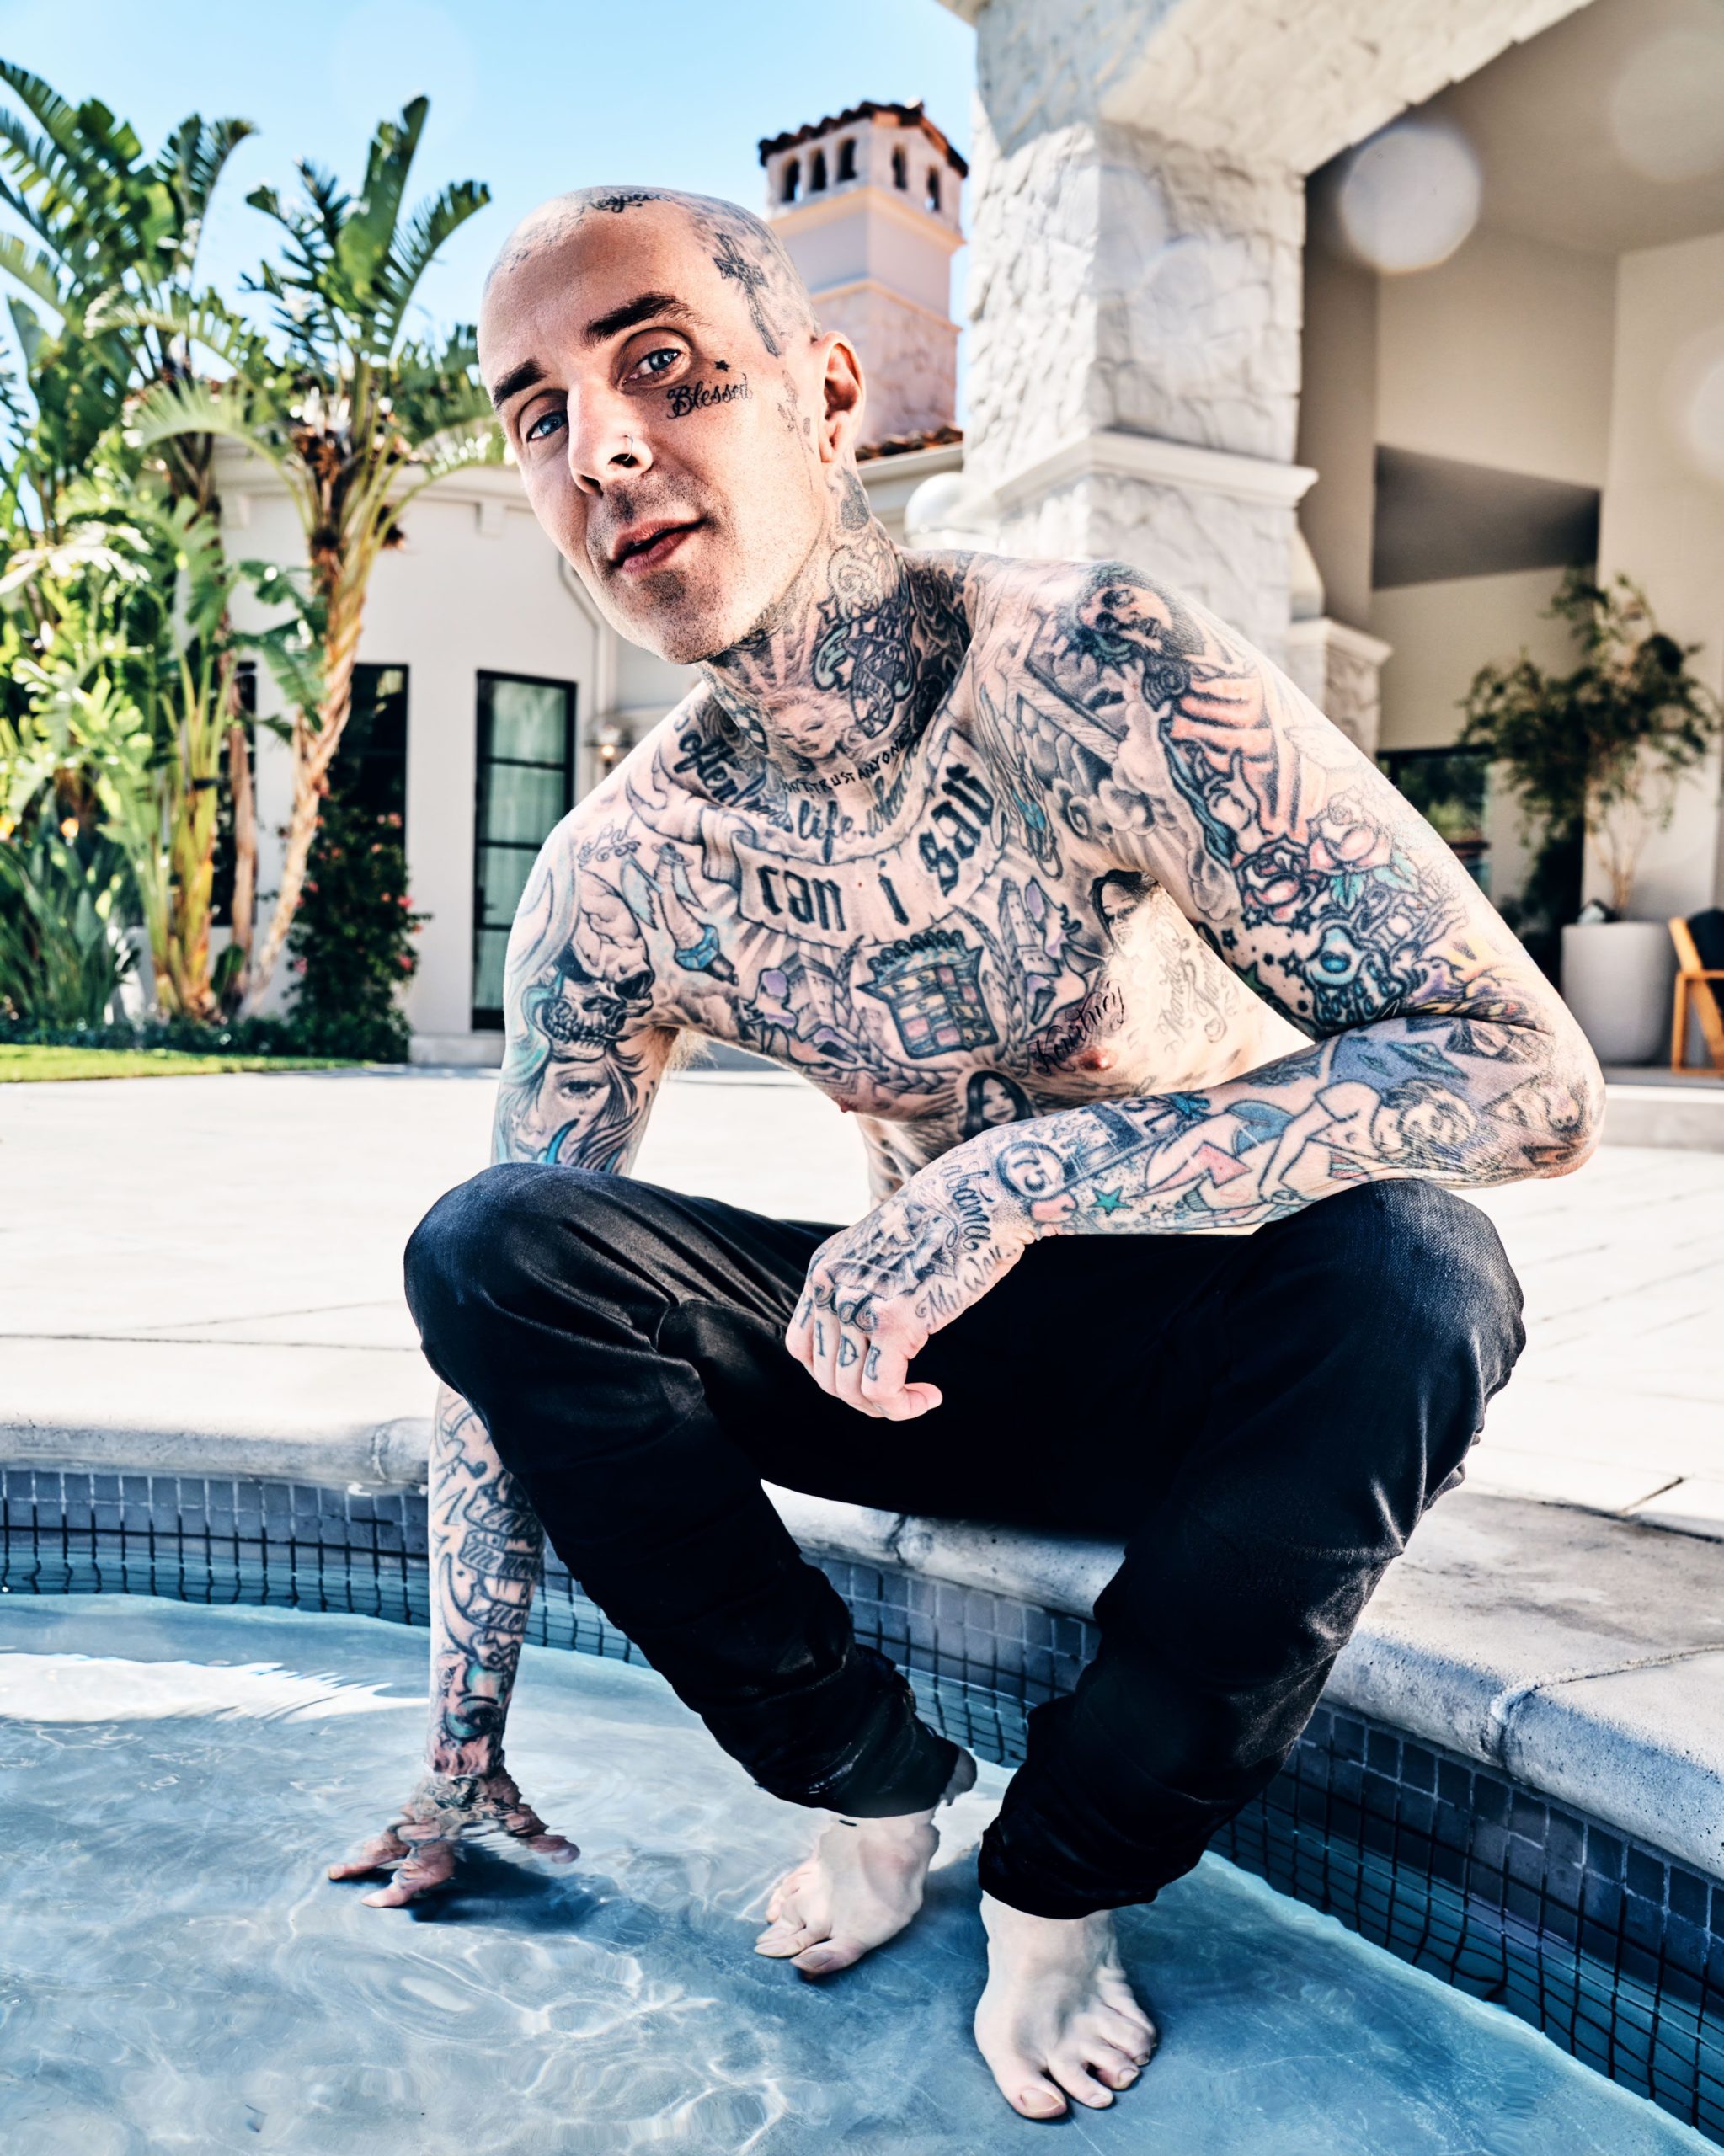 Featured image for “Travis Barker”